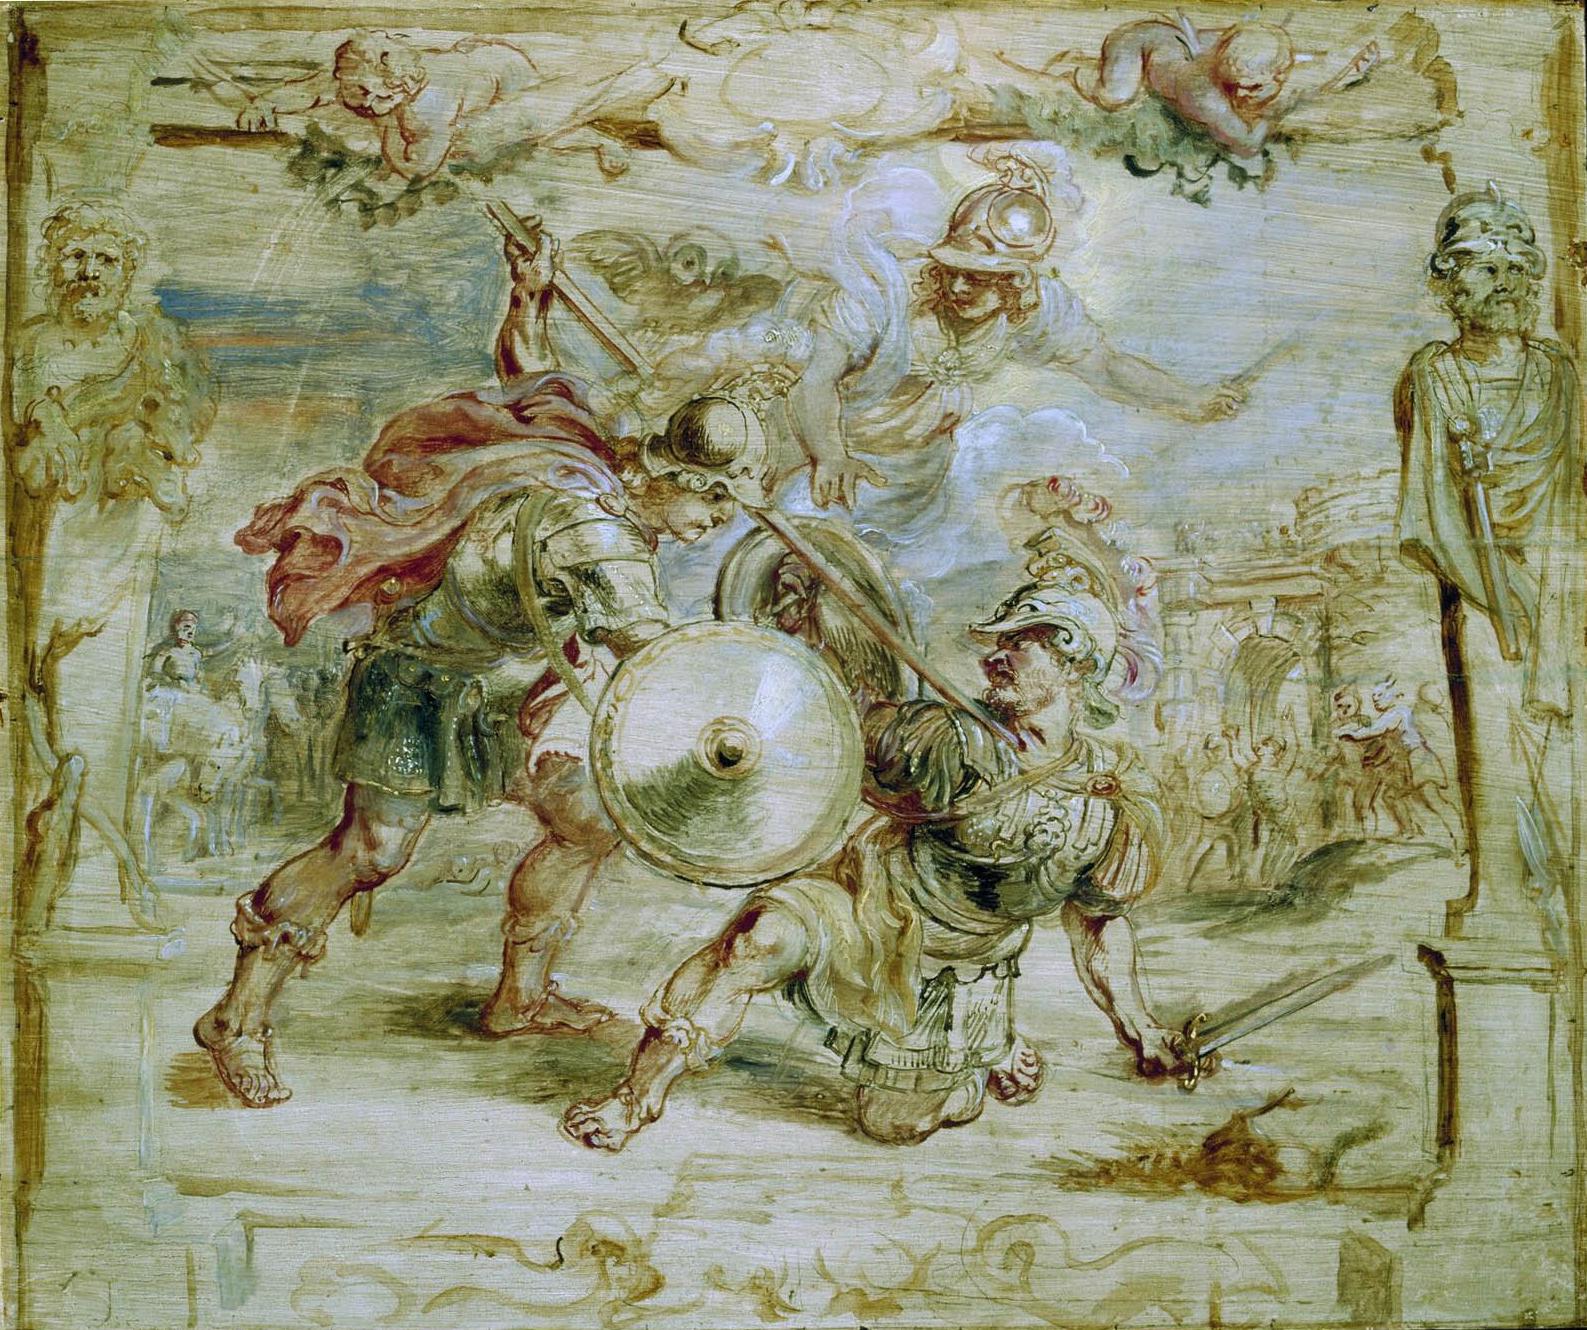 Death of Hector, a painting